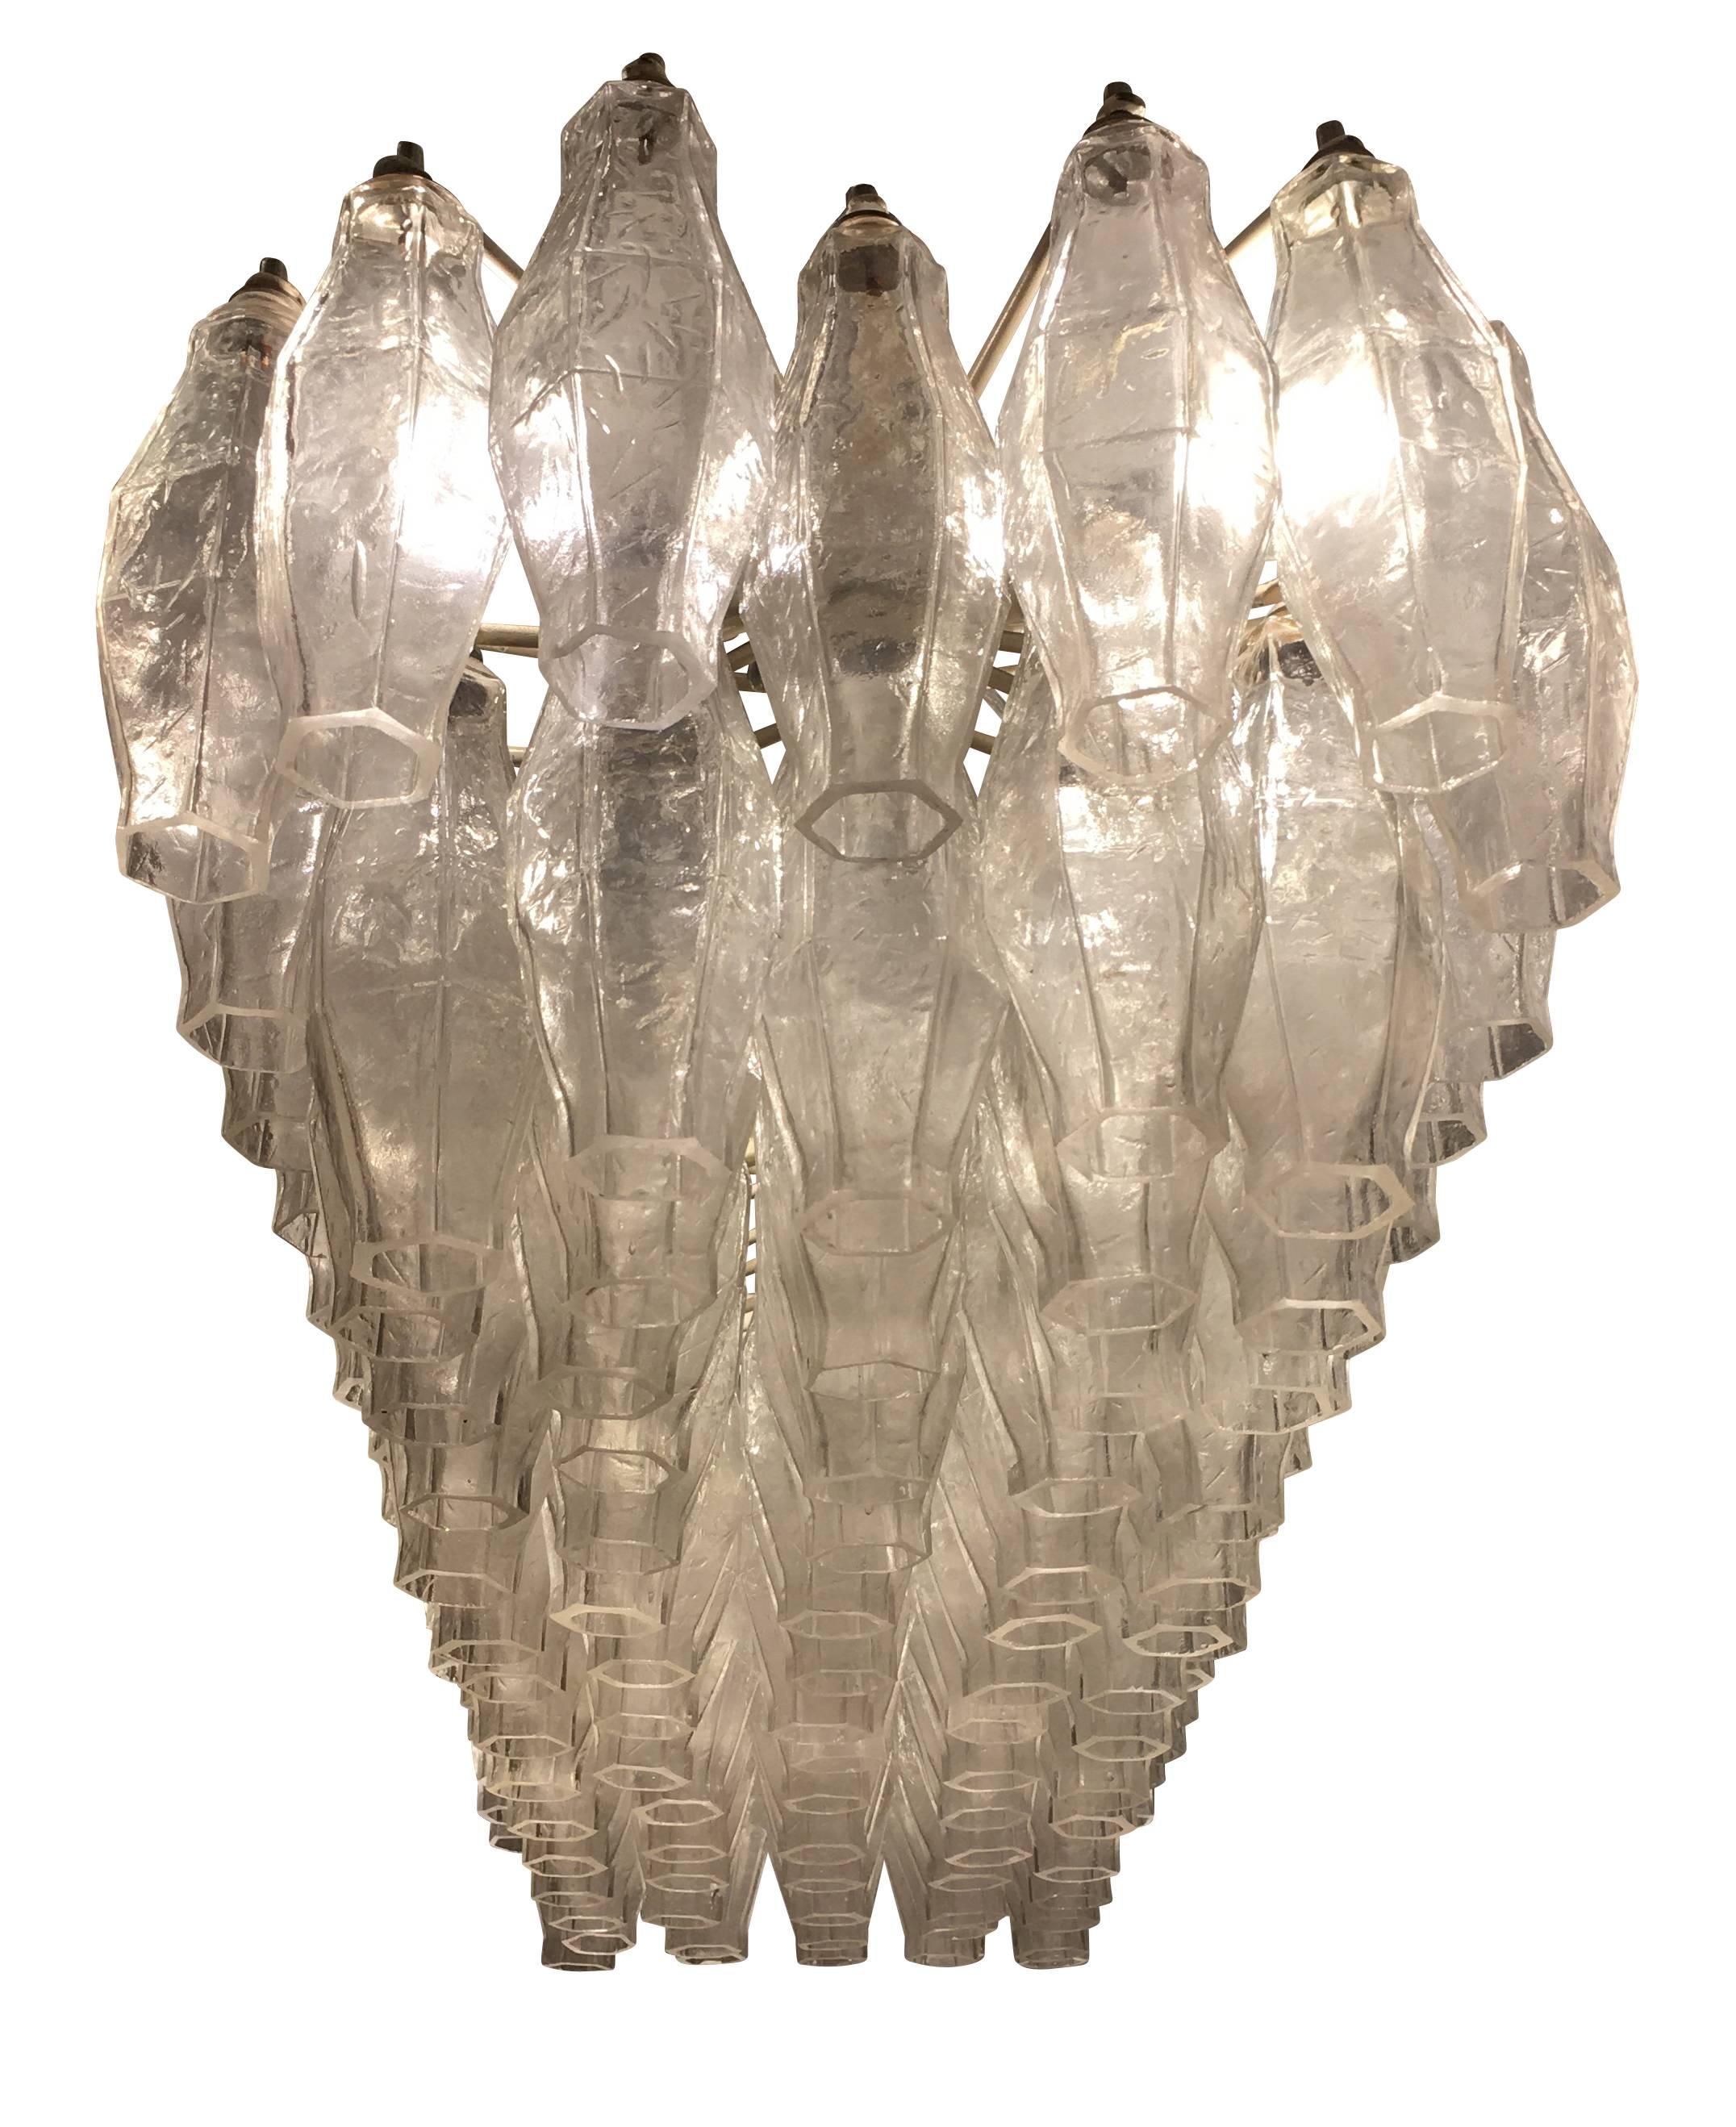 Italian Elongated Polyhedral Chandelier Attributed to Venini